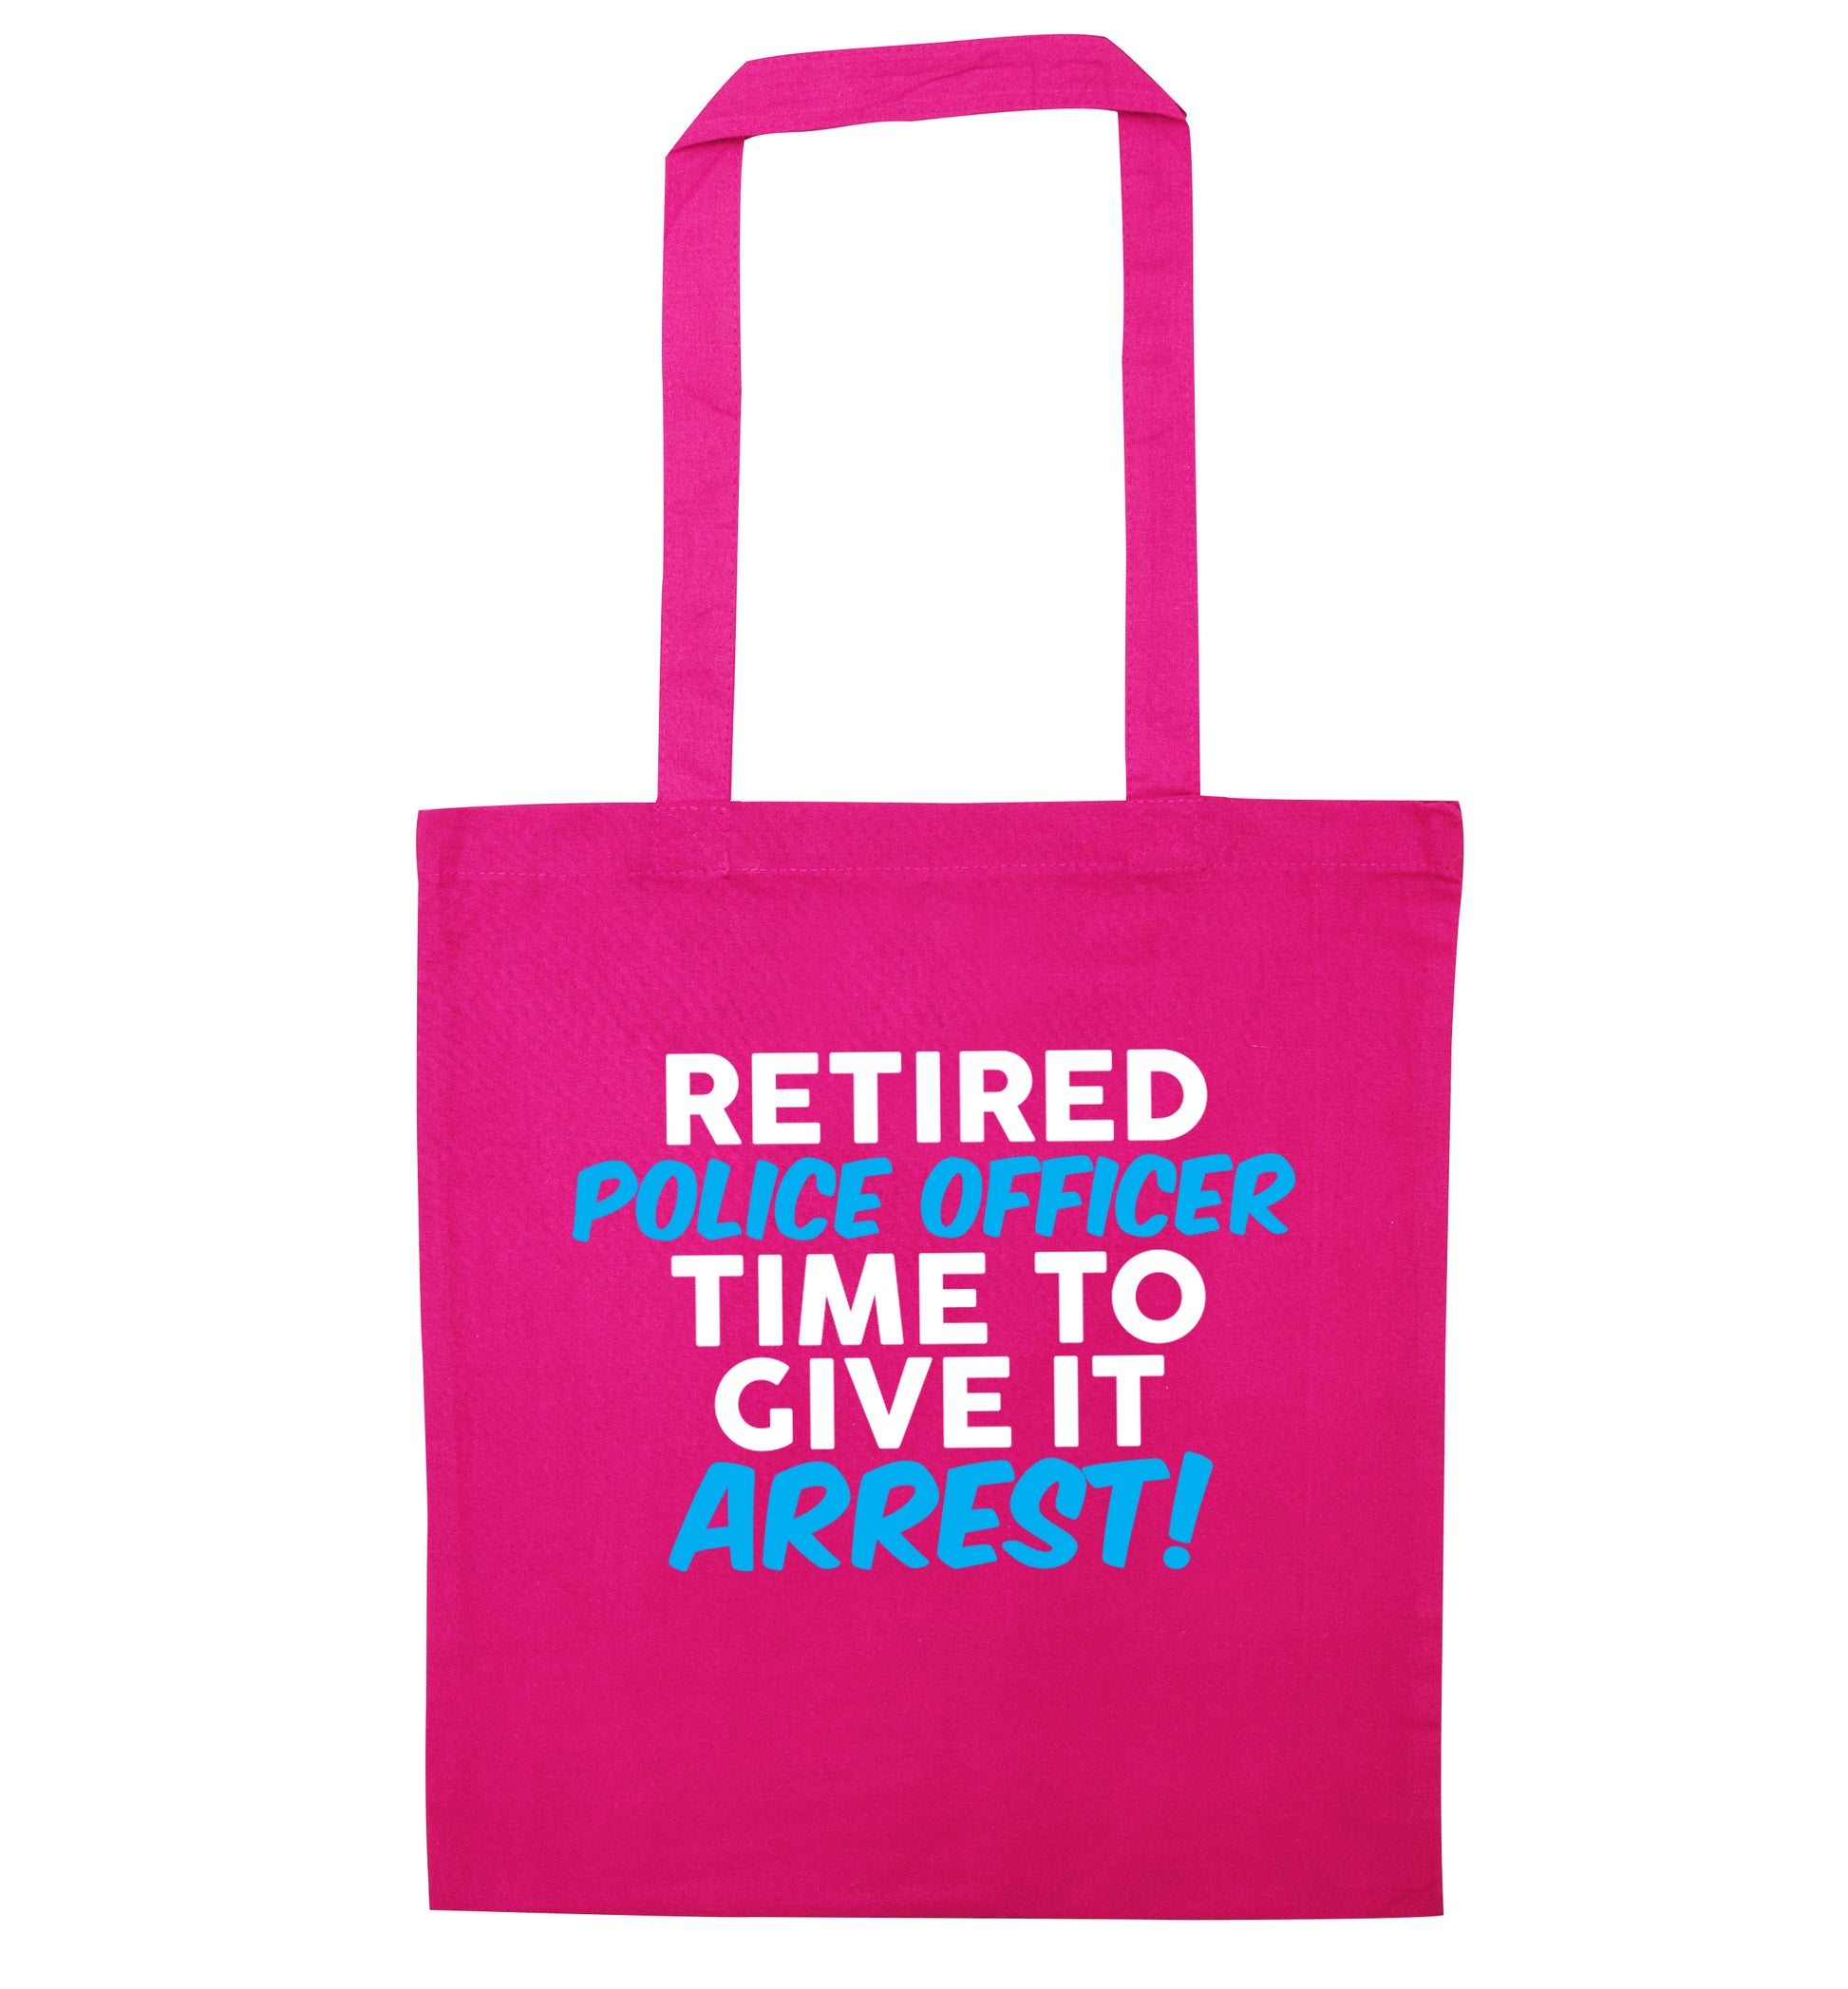 Retired police officer time to give it arrest pink tote bag